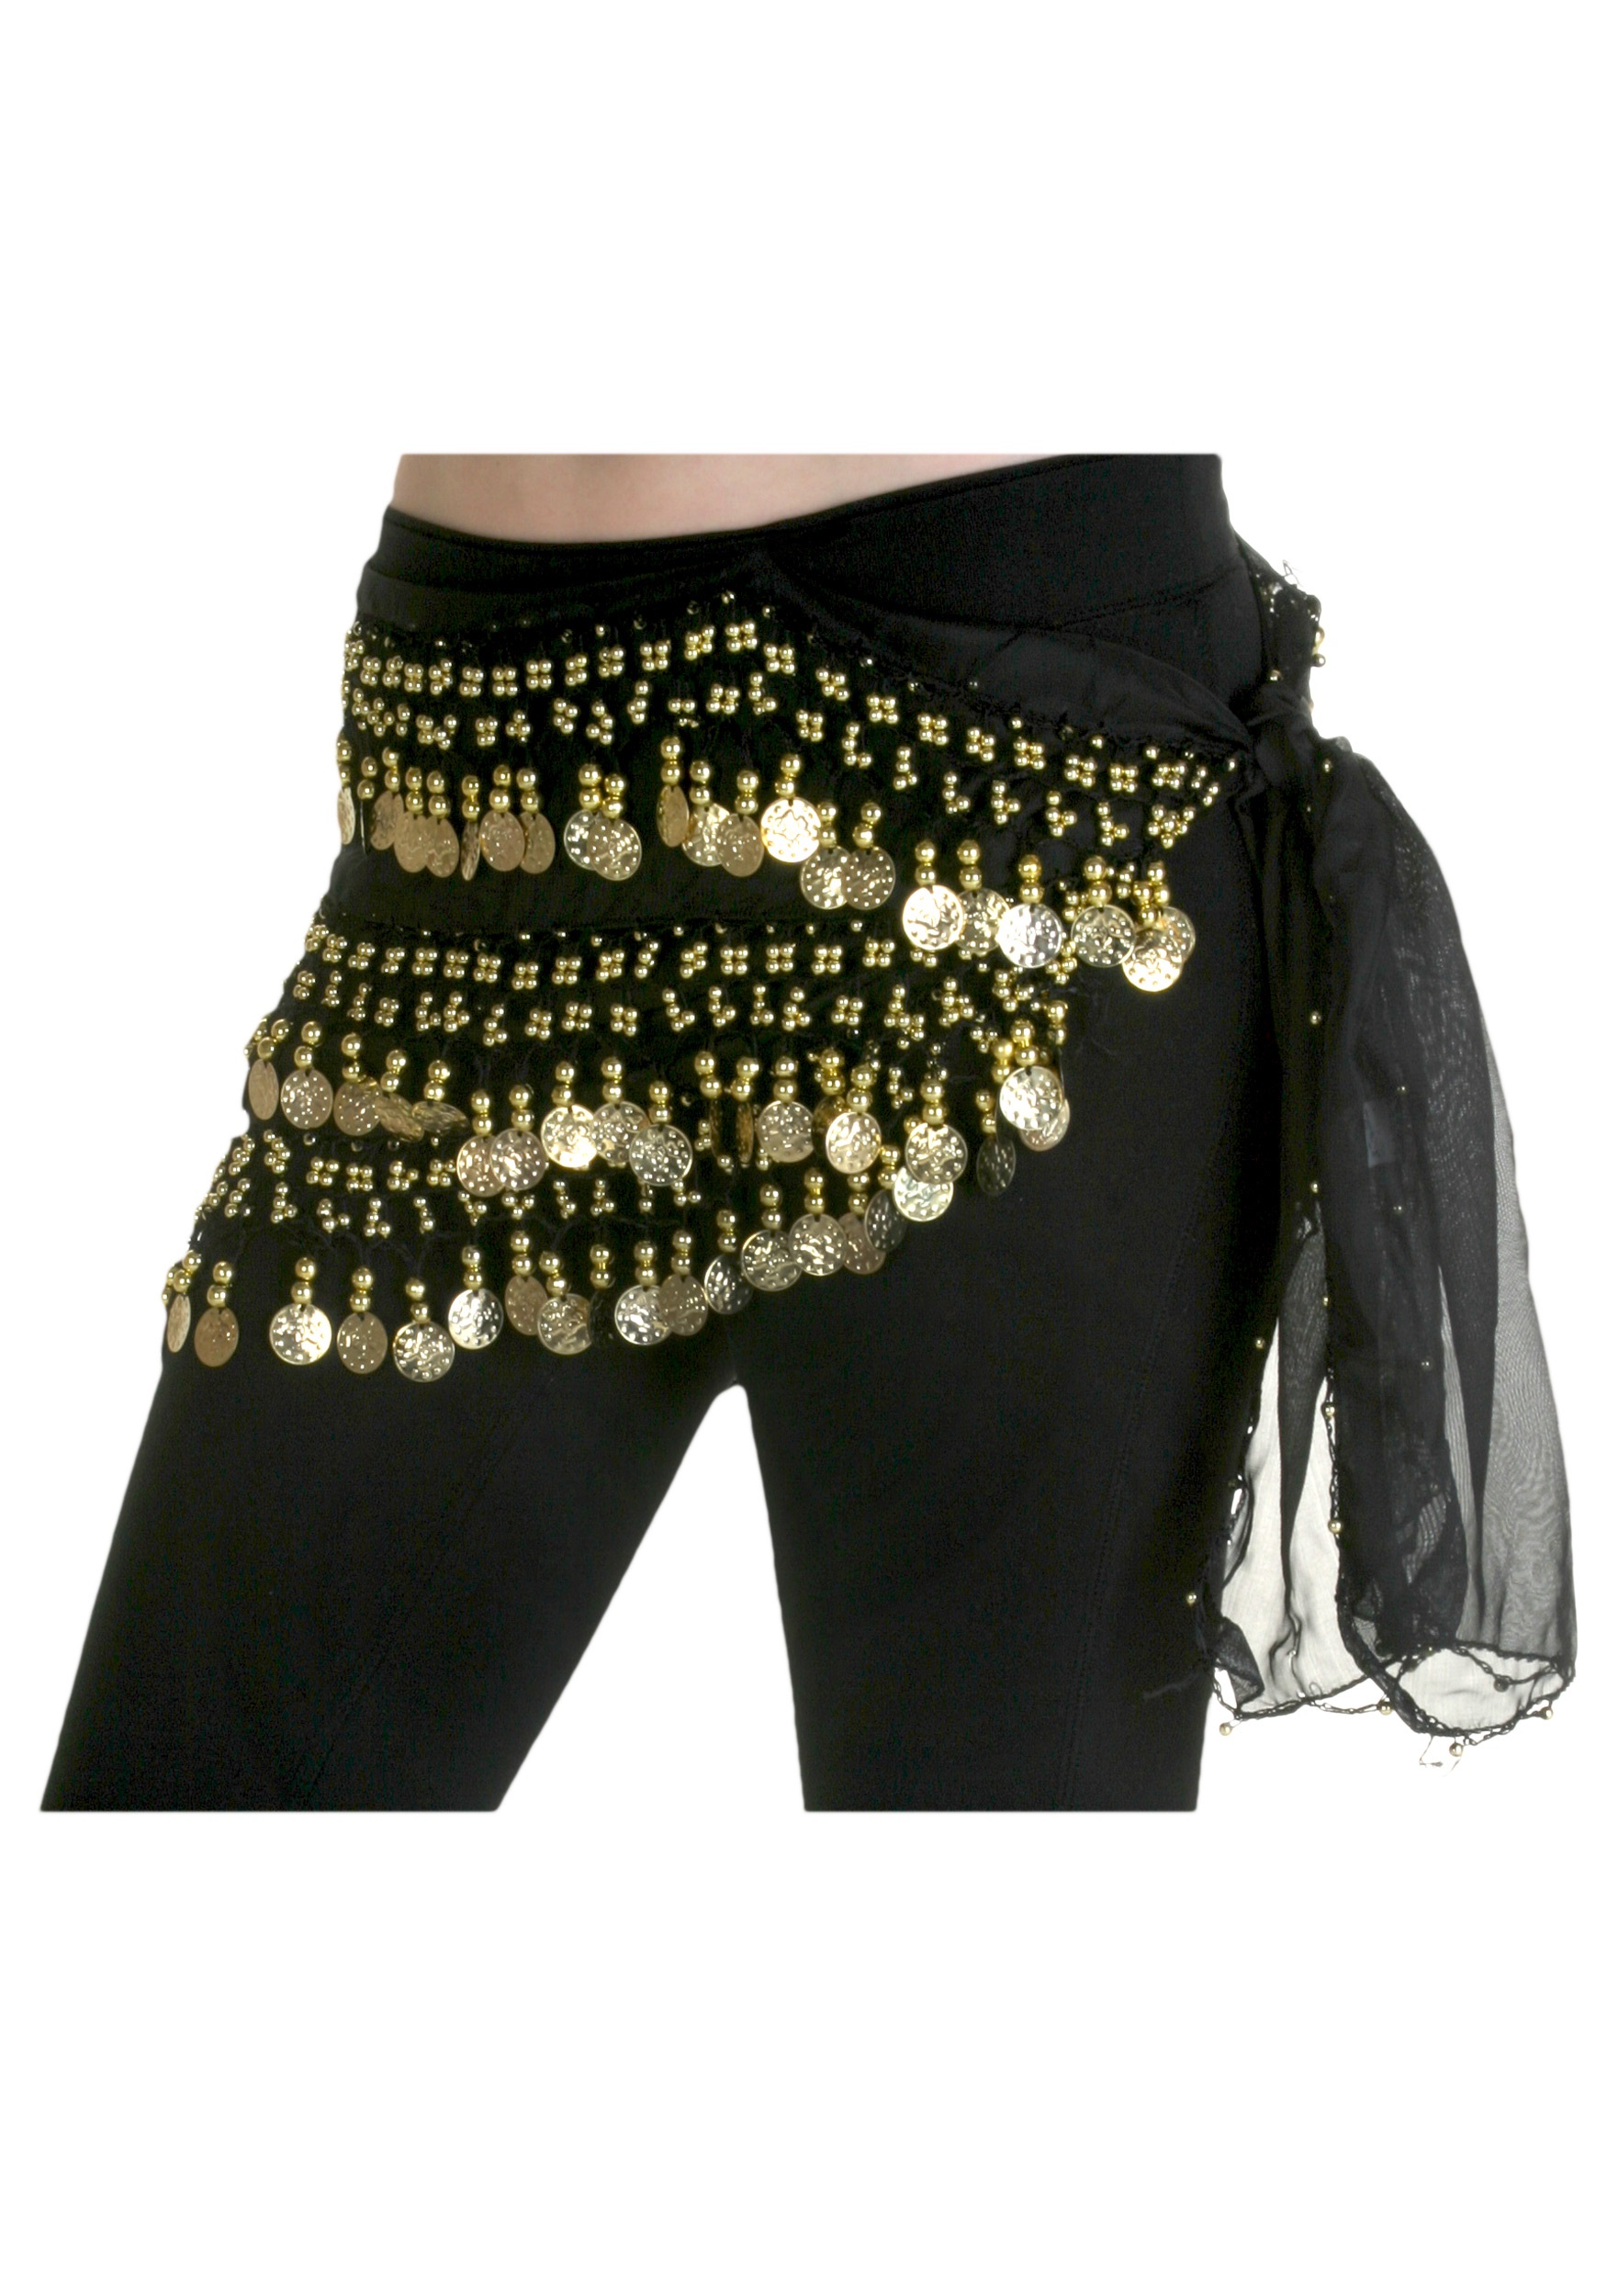 Black Chiffon Belly Dancing Hip Scarf Costume Accessories